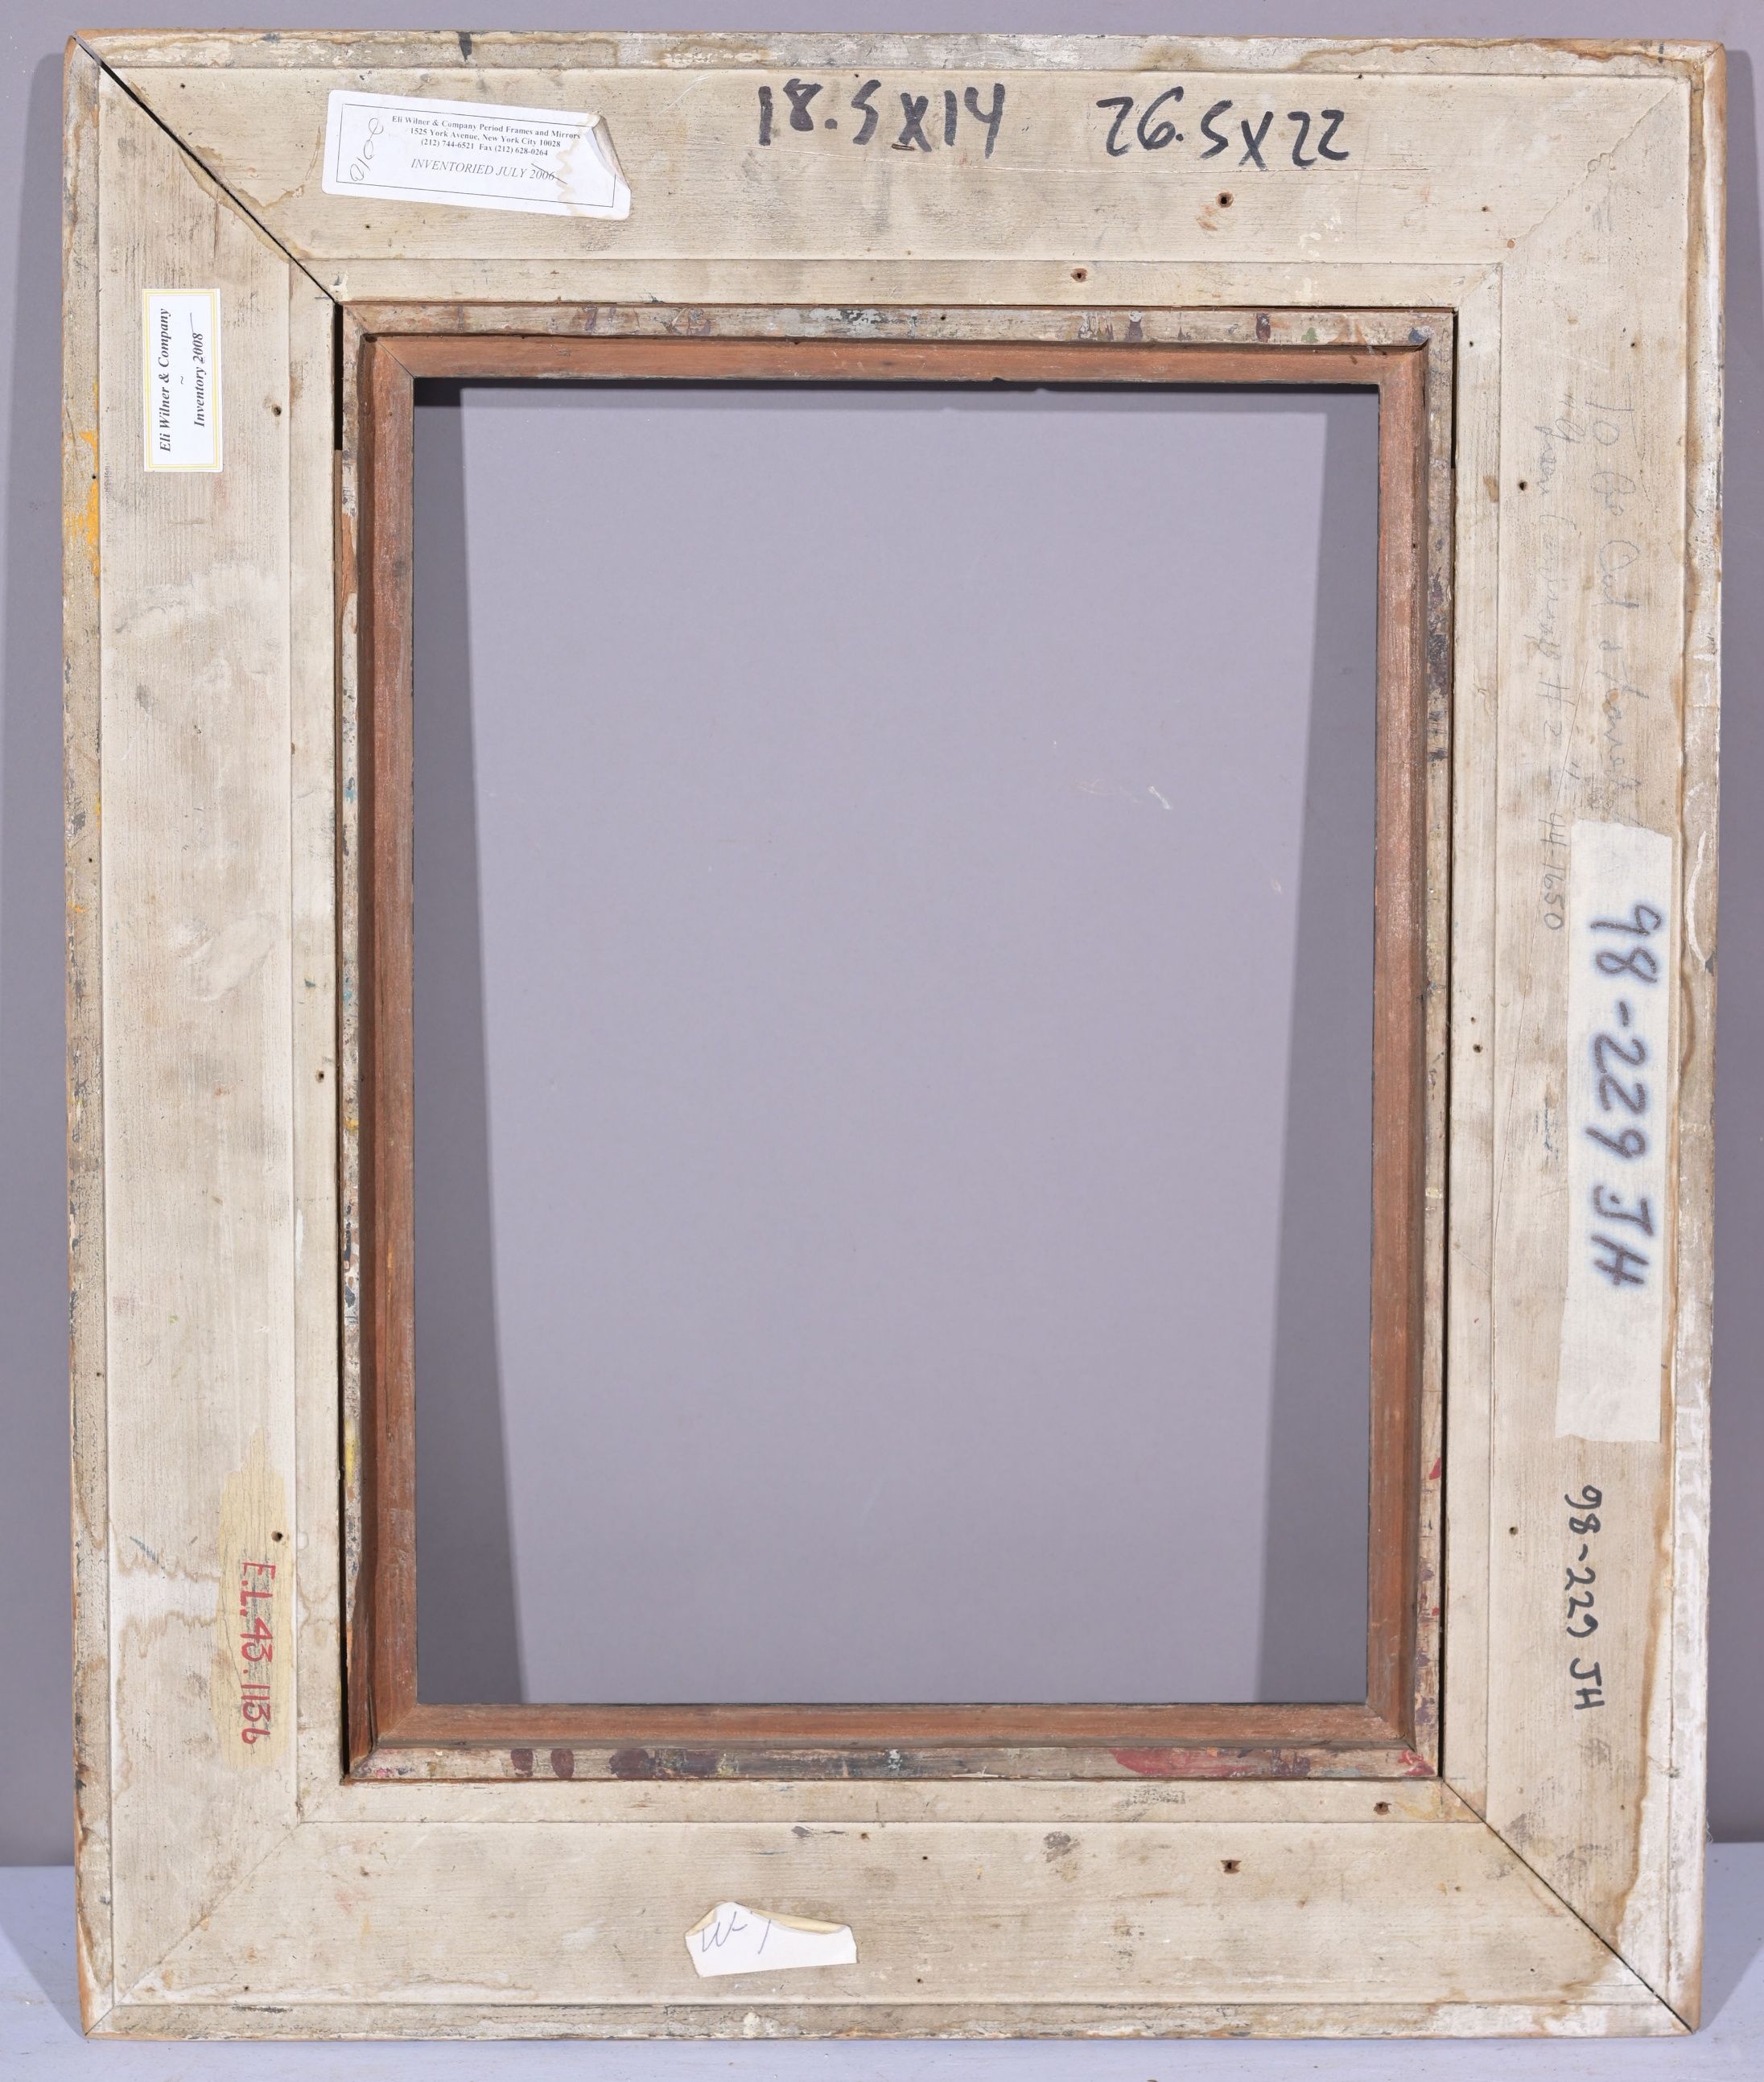 American 1950's Frame - 18.5 x 14 - Image 7 of 7